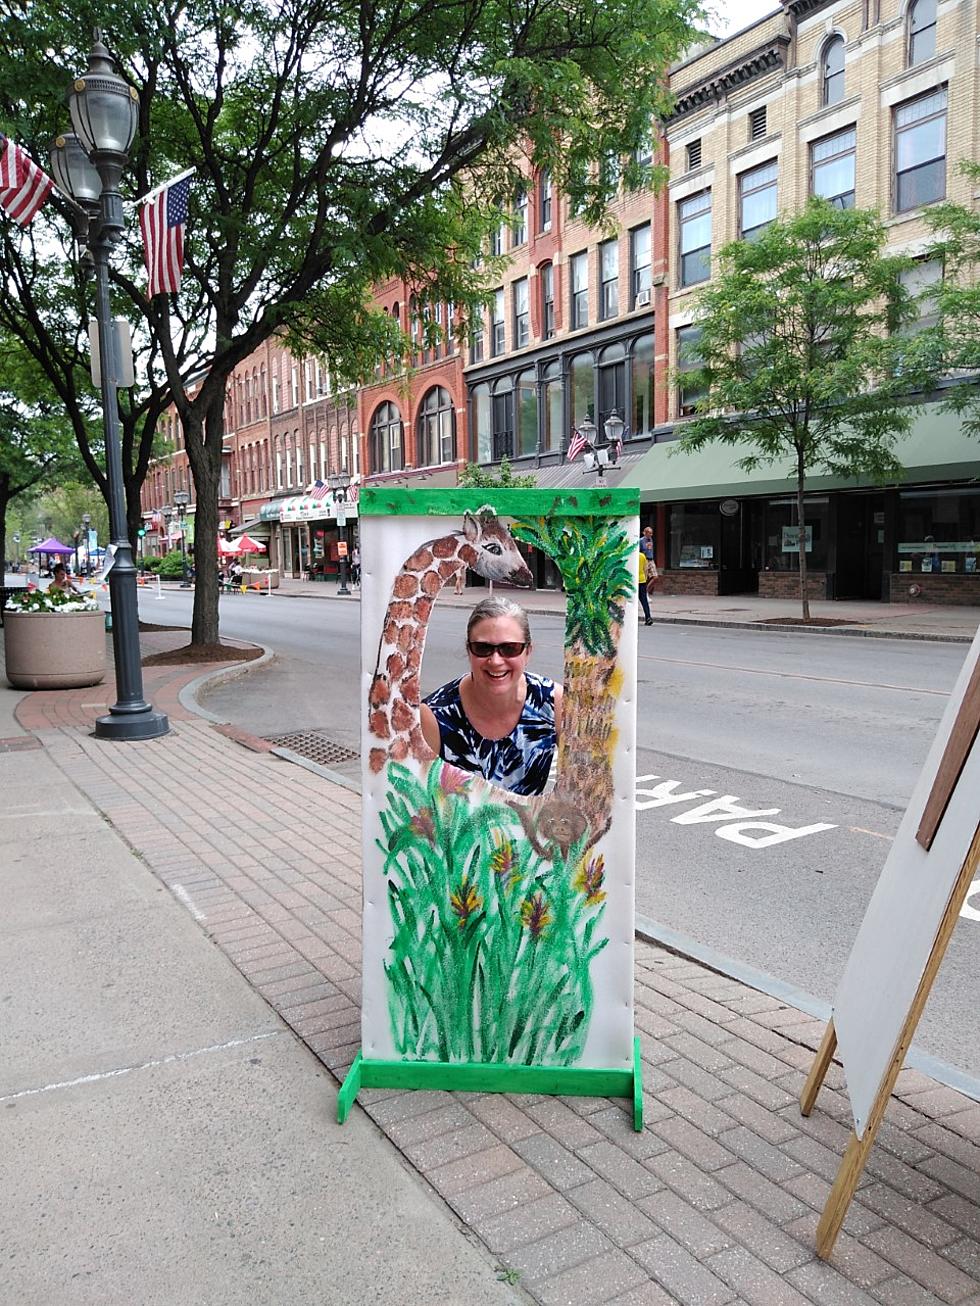 ‘Meet Me on Main St.’ Kickoff Sets Awesome Tone For Summer Fun